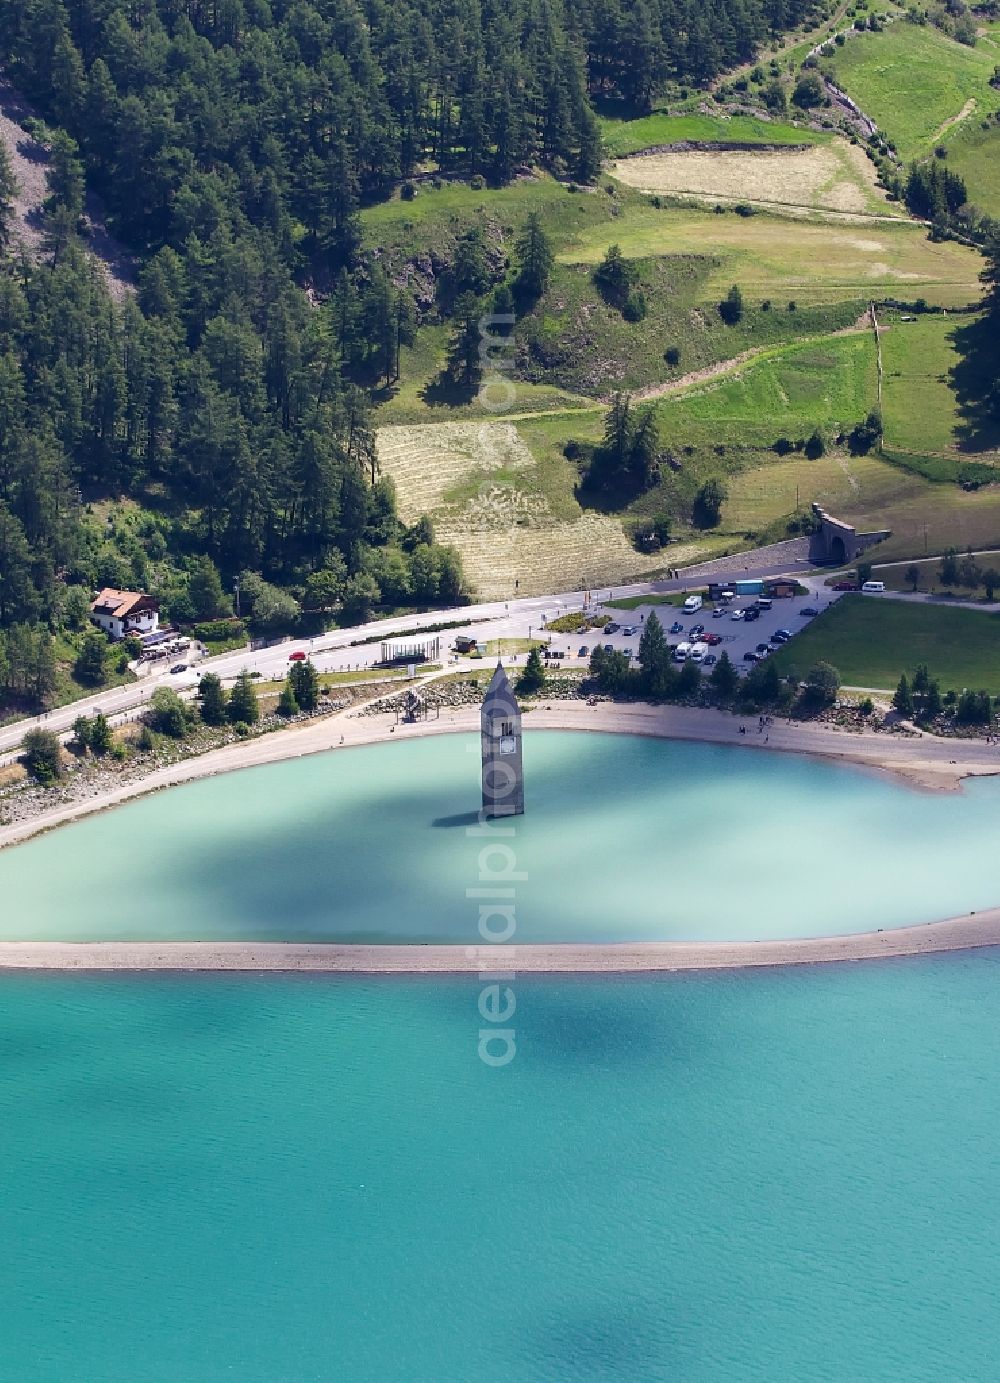 Graun Im Vinschgau from the bird's eye view: View of the church steeple Alt-Graun in Vinschgau in Italy. At the beginning of the 20th century, all of the buildings in Alt-Graun were blown up, so the area could be used as a reservoir